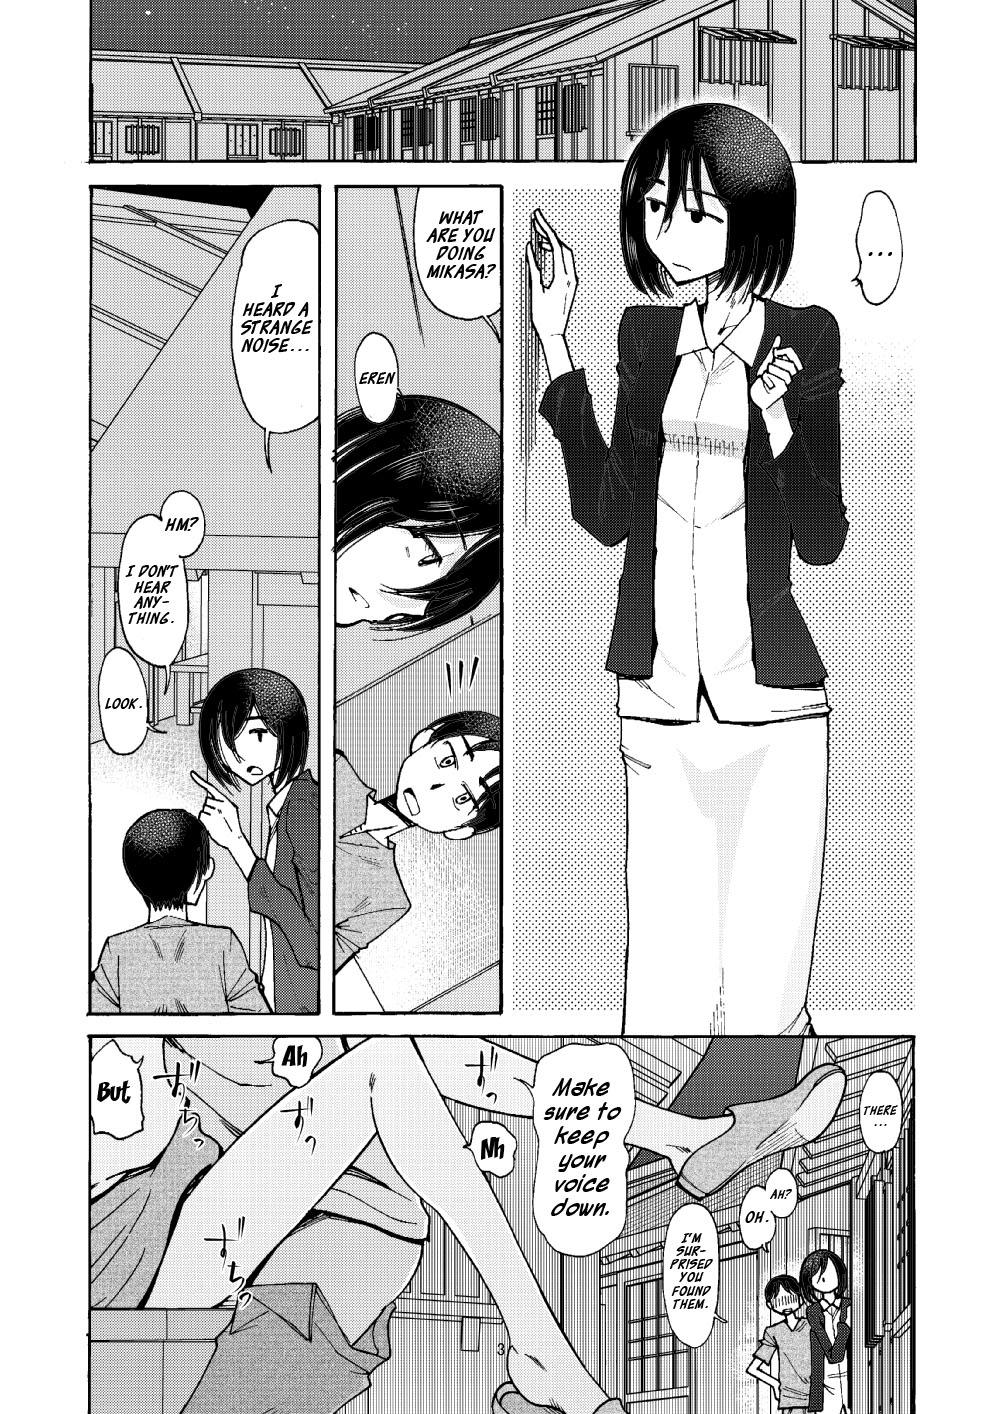 Sex Massage I Love Eren. Eren Loves Me. There's Nothing Wrong. - Shingeki no kyojin Culos - Page 2